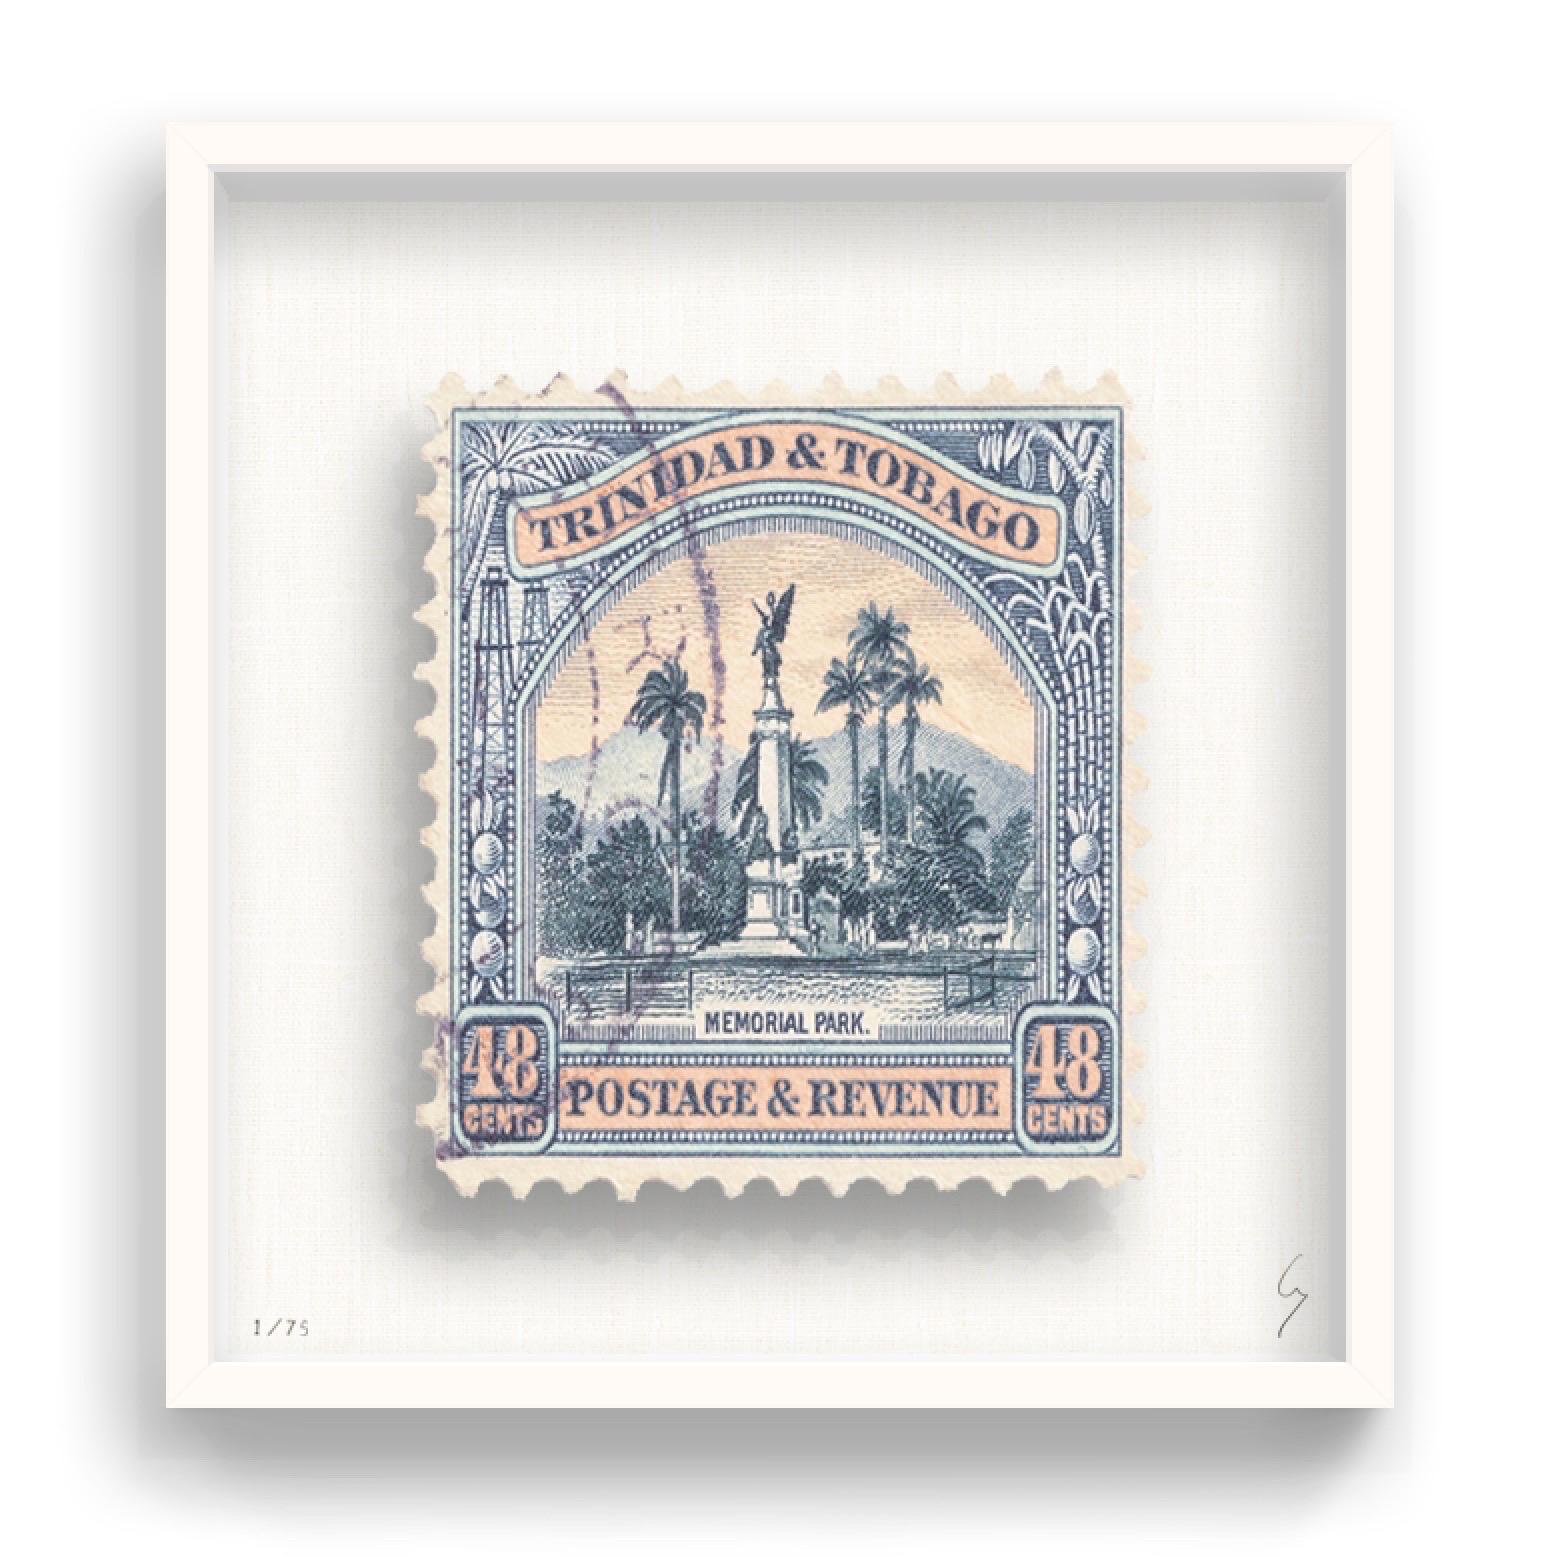 Guy Gee, Trinidad and Tobago (medium)

Hand-engraved print on 350gsm on G.F Smith card
31 x 35 cm (12 1/5 x 13 4/5)
Frame included 
Edition of 75 

Each artwork by Guy had been digitally reimagined from an original postage stamp. Cut out and